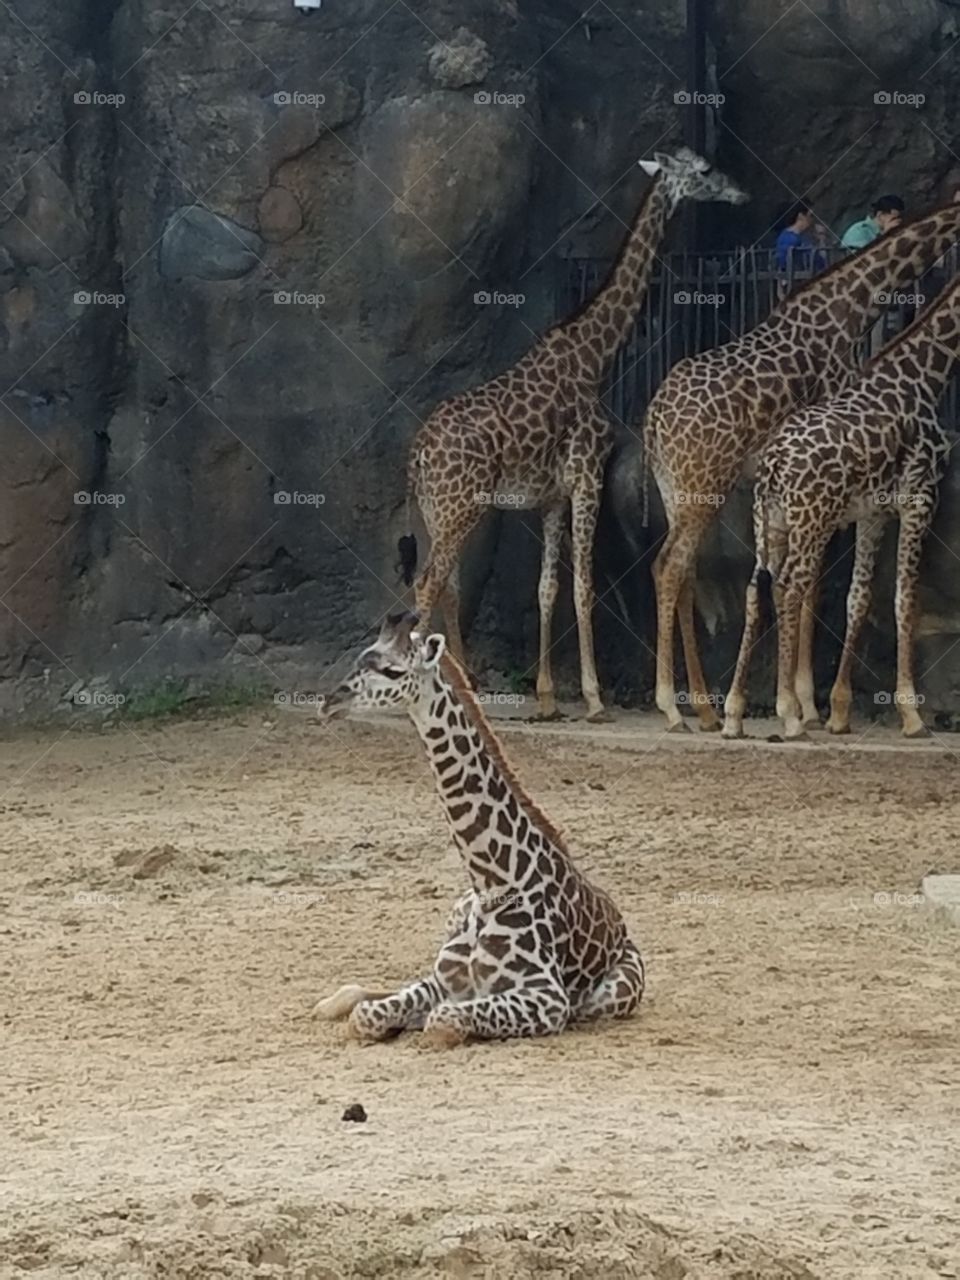 Baby giraffe sitting alone and watching people watch him. This giraffe sat like that for quite a while.